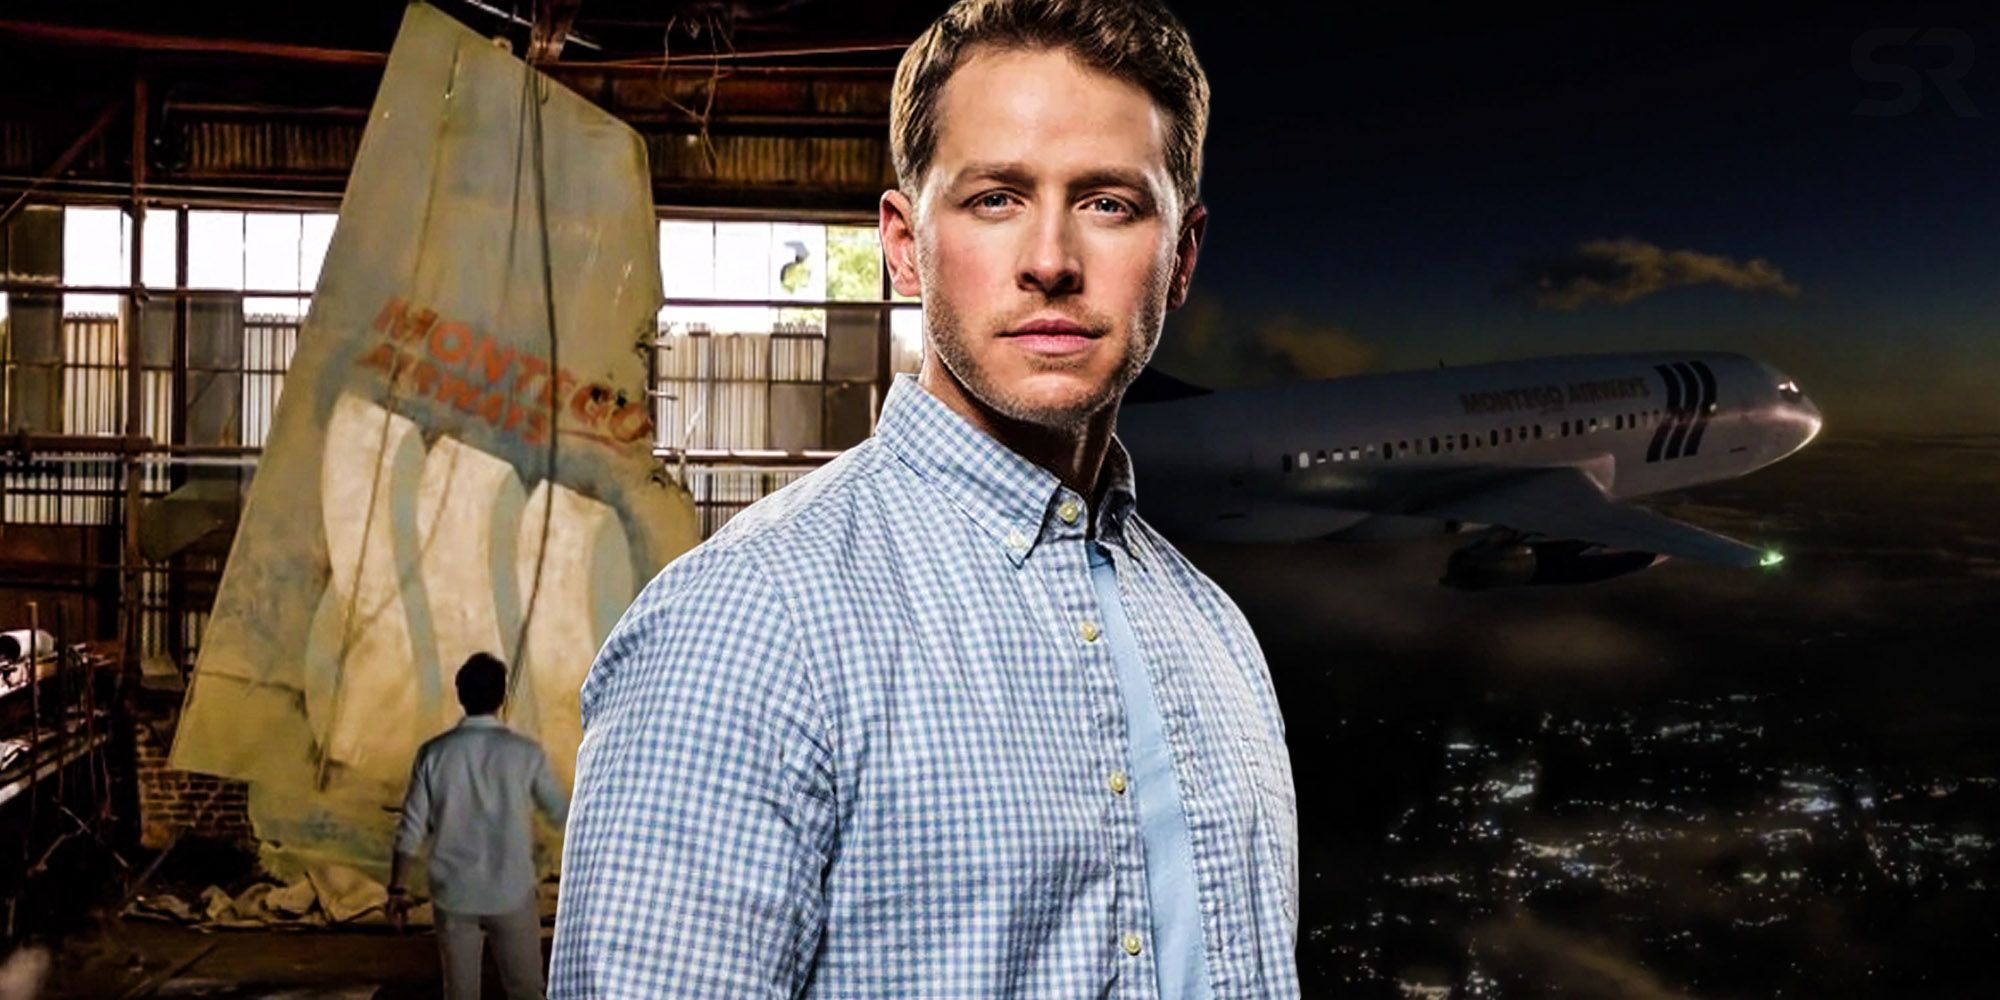 Ben standing in front of a tailfin in a warehouse and Flight 828 in the air in Manifest.